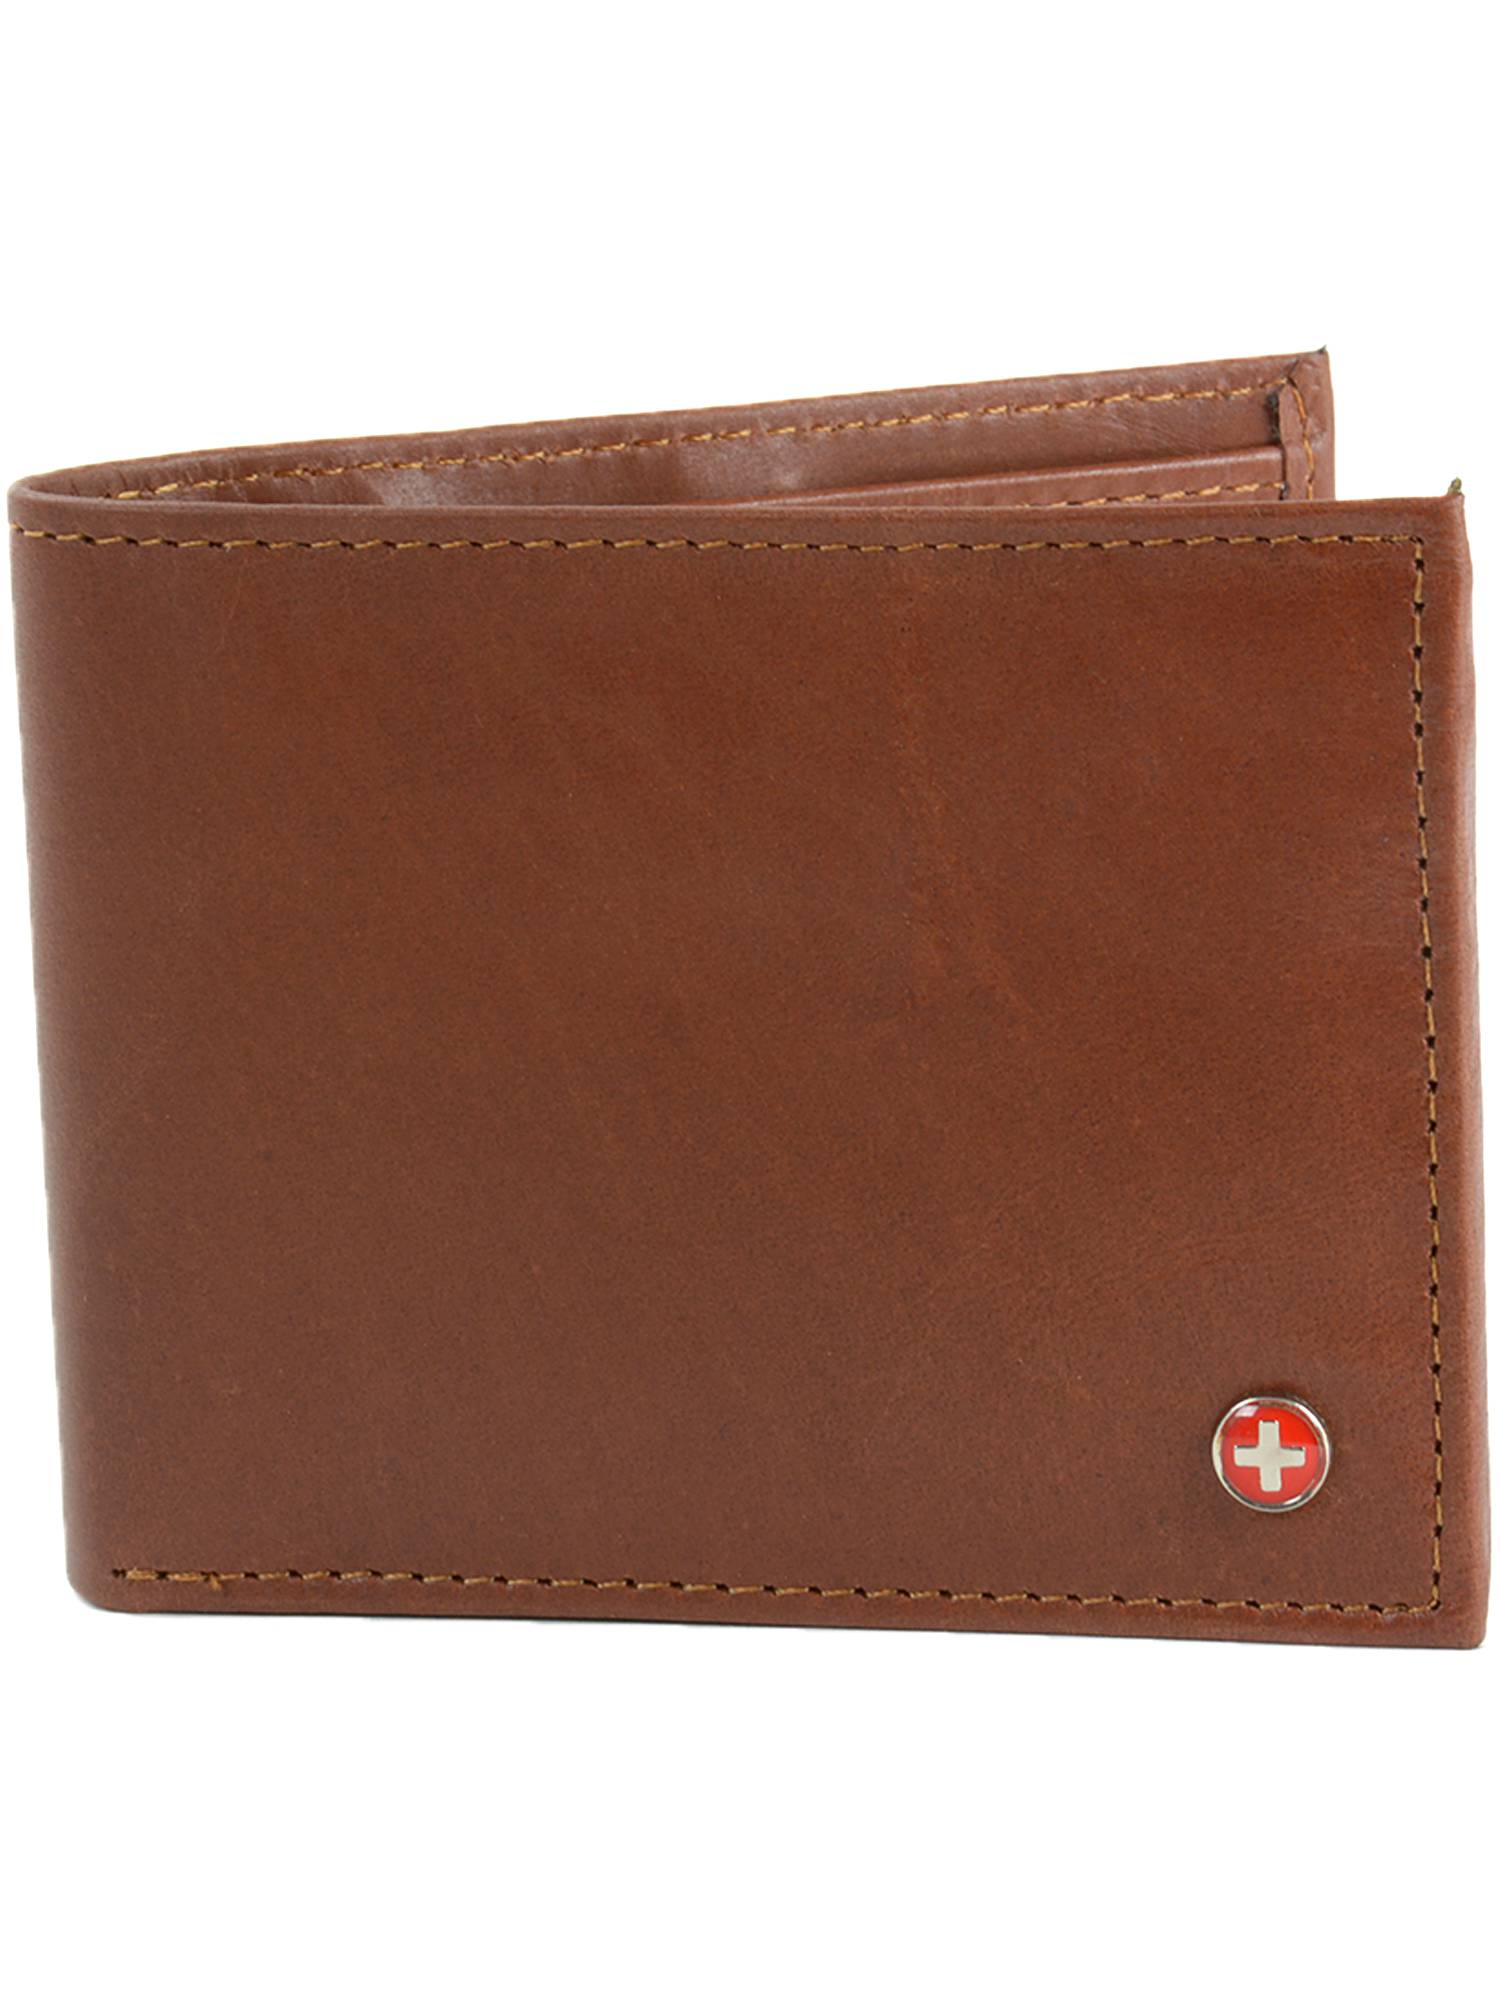 Alpine Swiss Mens Leather RFID Bifold Wallet 2 ID Windows Divided Bill Section - image 1 of 7